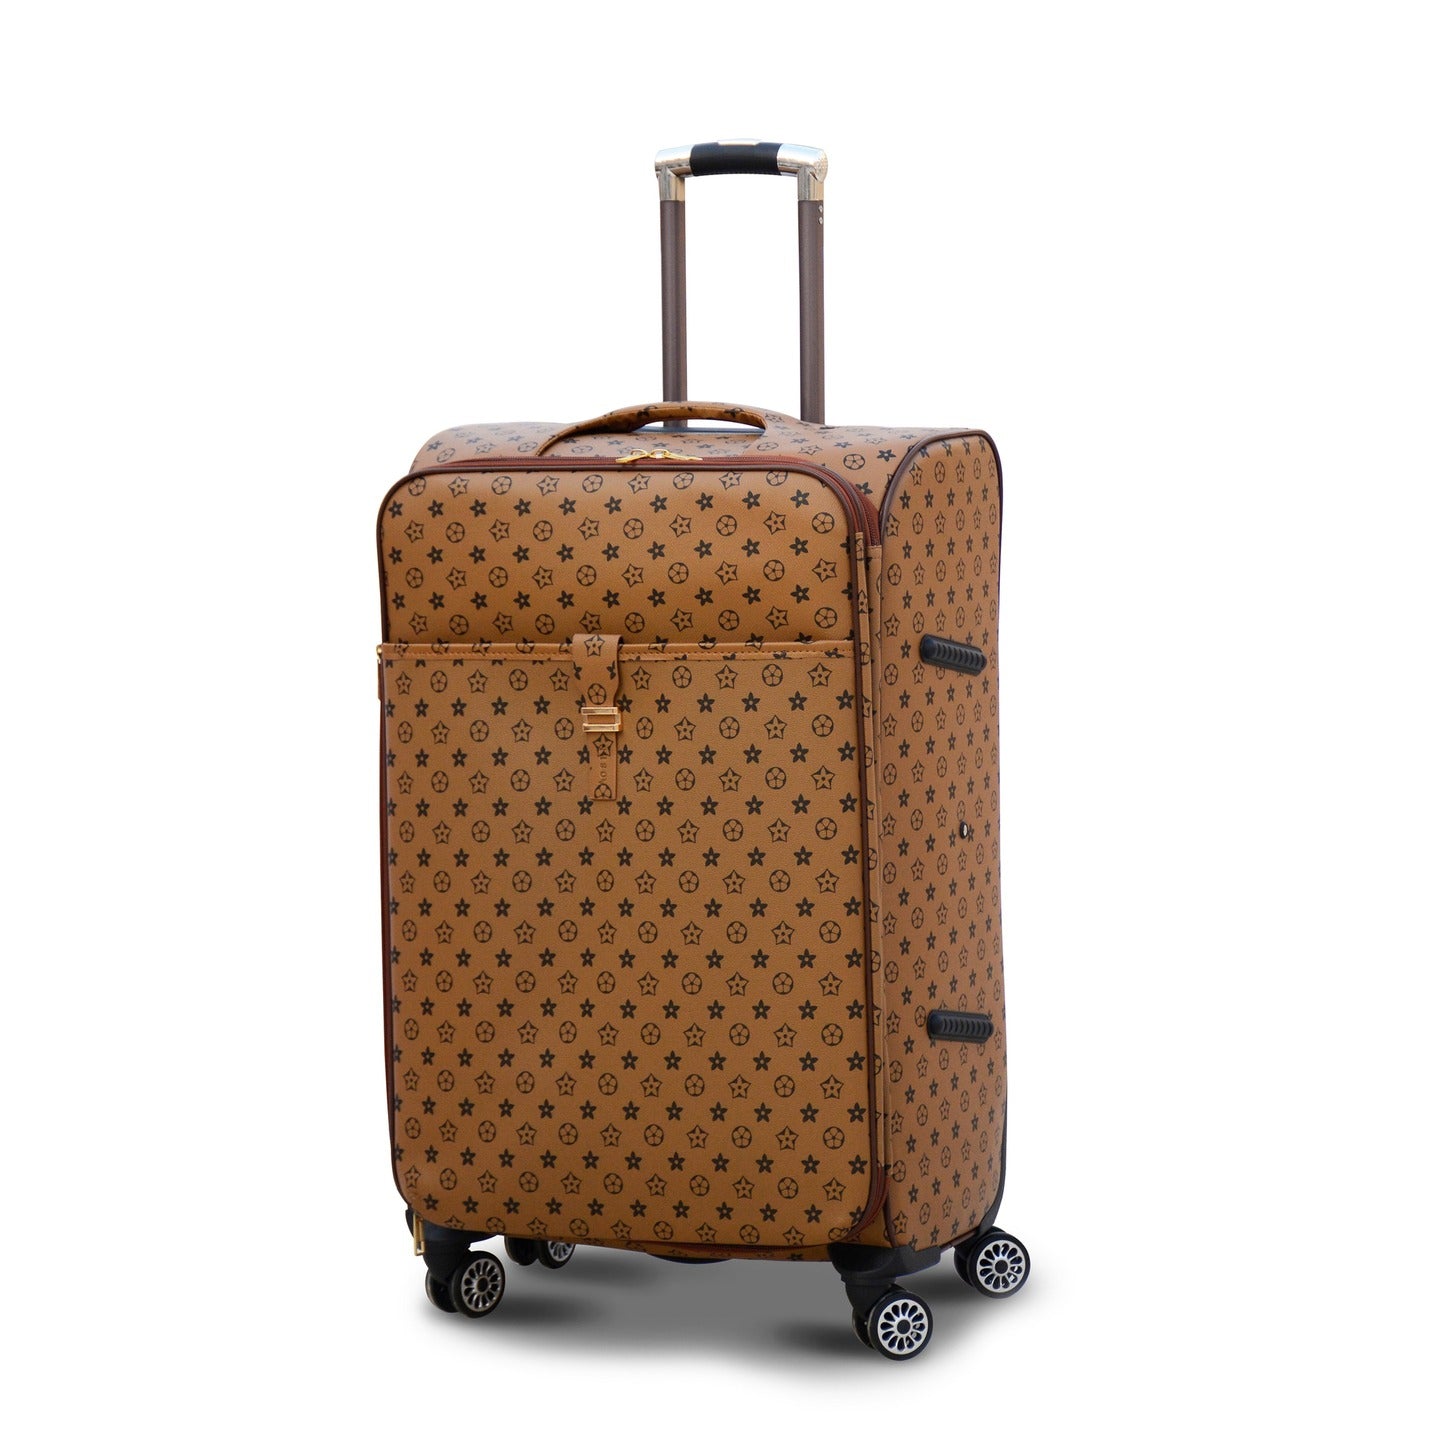 28" Light Brown Colour LVR PU Leather Luggage Lightweight Trolley Bag with Spinner Wheel